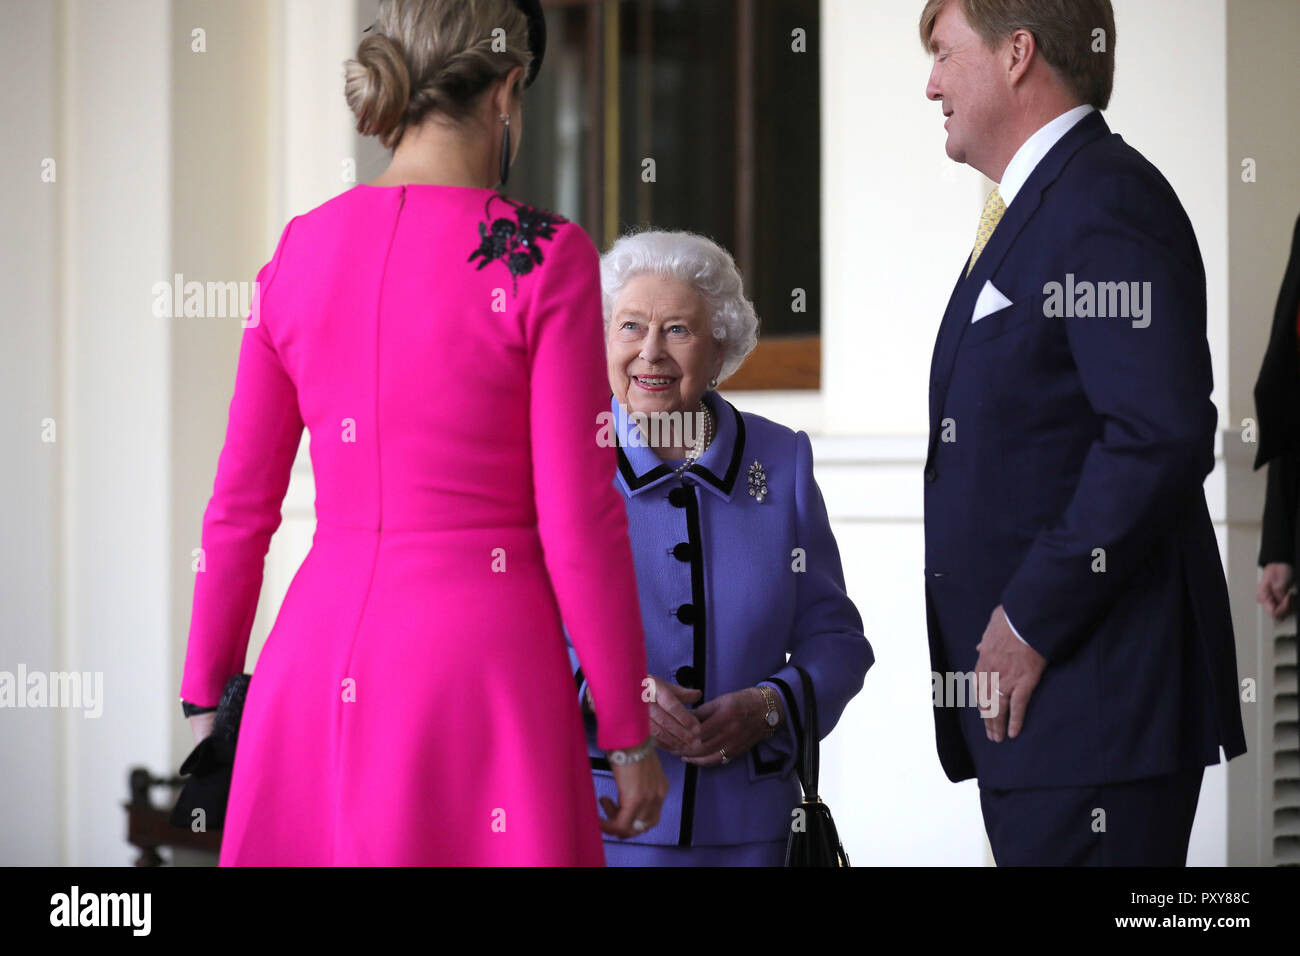 king-willem-alexander-and-queen-maxima-of-the-netherlands-attend-a-formal-farewell-with-queen-elizabeth-ii-at-buckingham-palace-london-as-they-reach-the-end-of-their-state-visit-to-the-uk-PXY88C.jpg